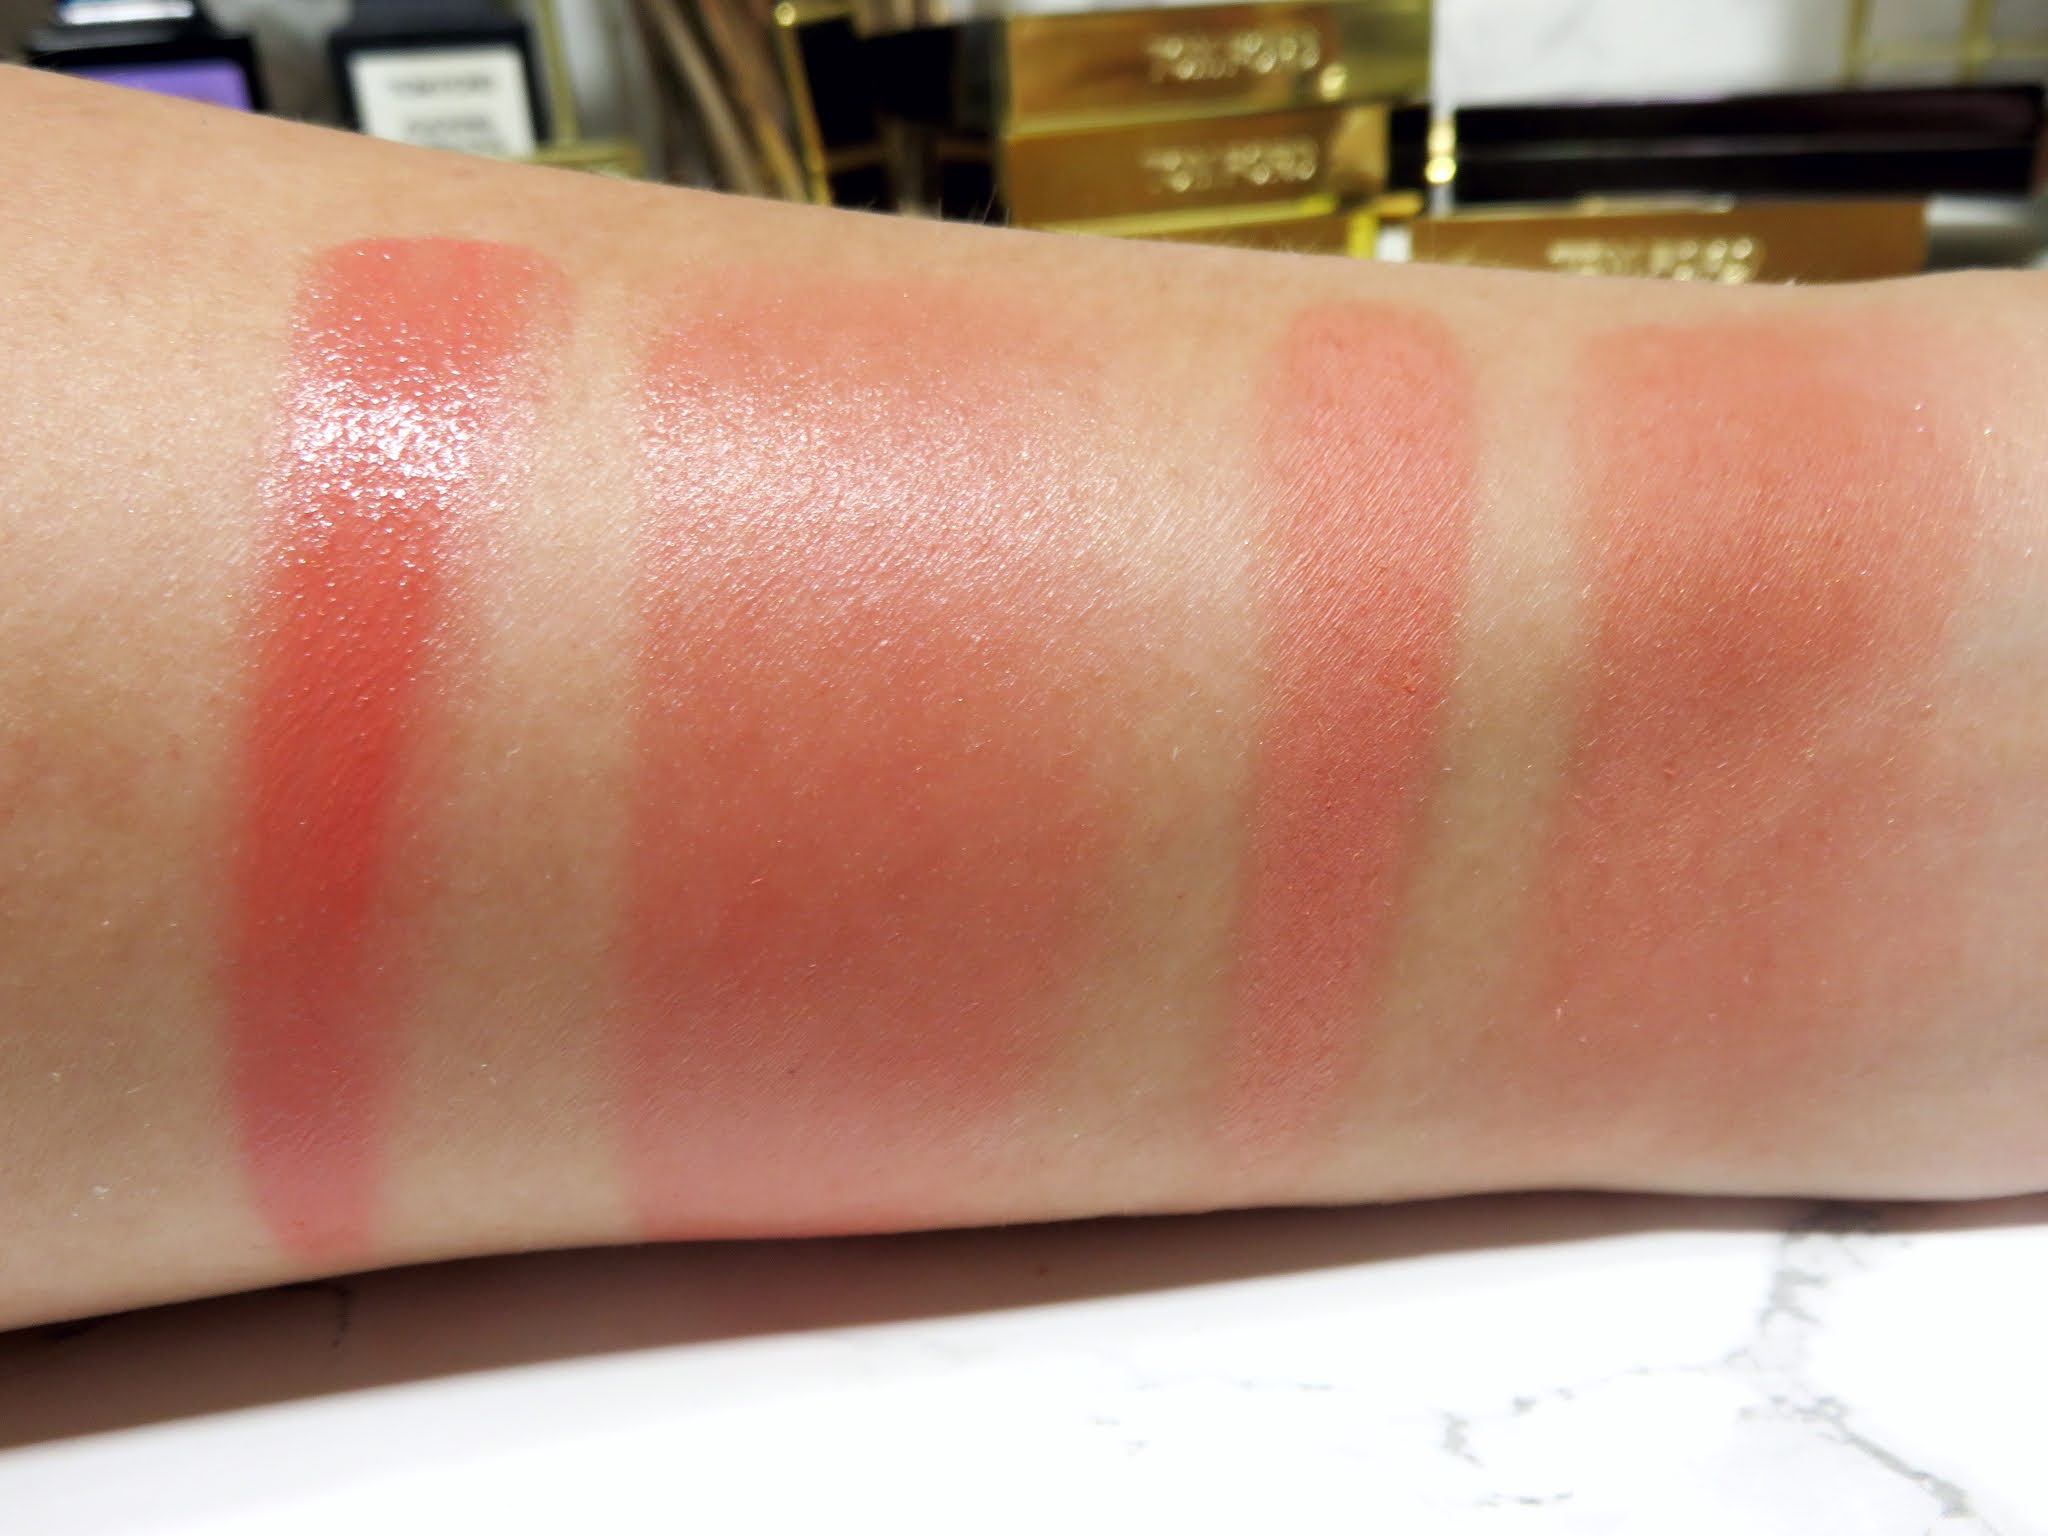 Patrick Ta Major Beauty Headlines Double-Take Crème & Powder Blush Review and Swatches